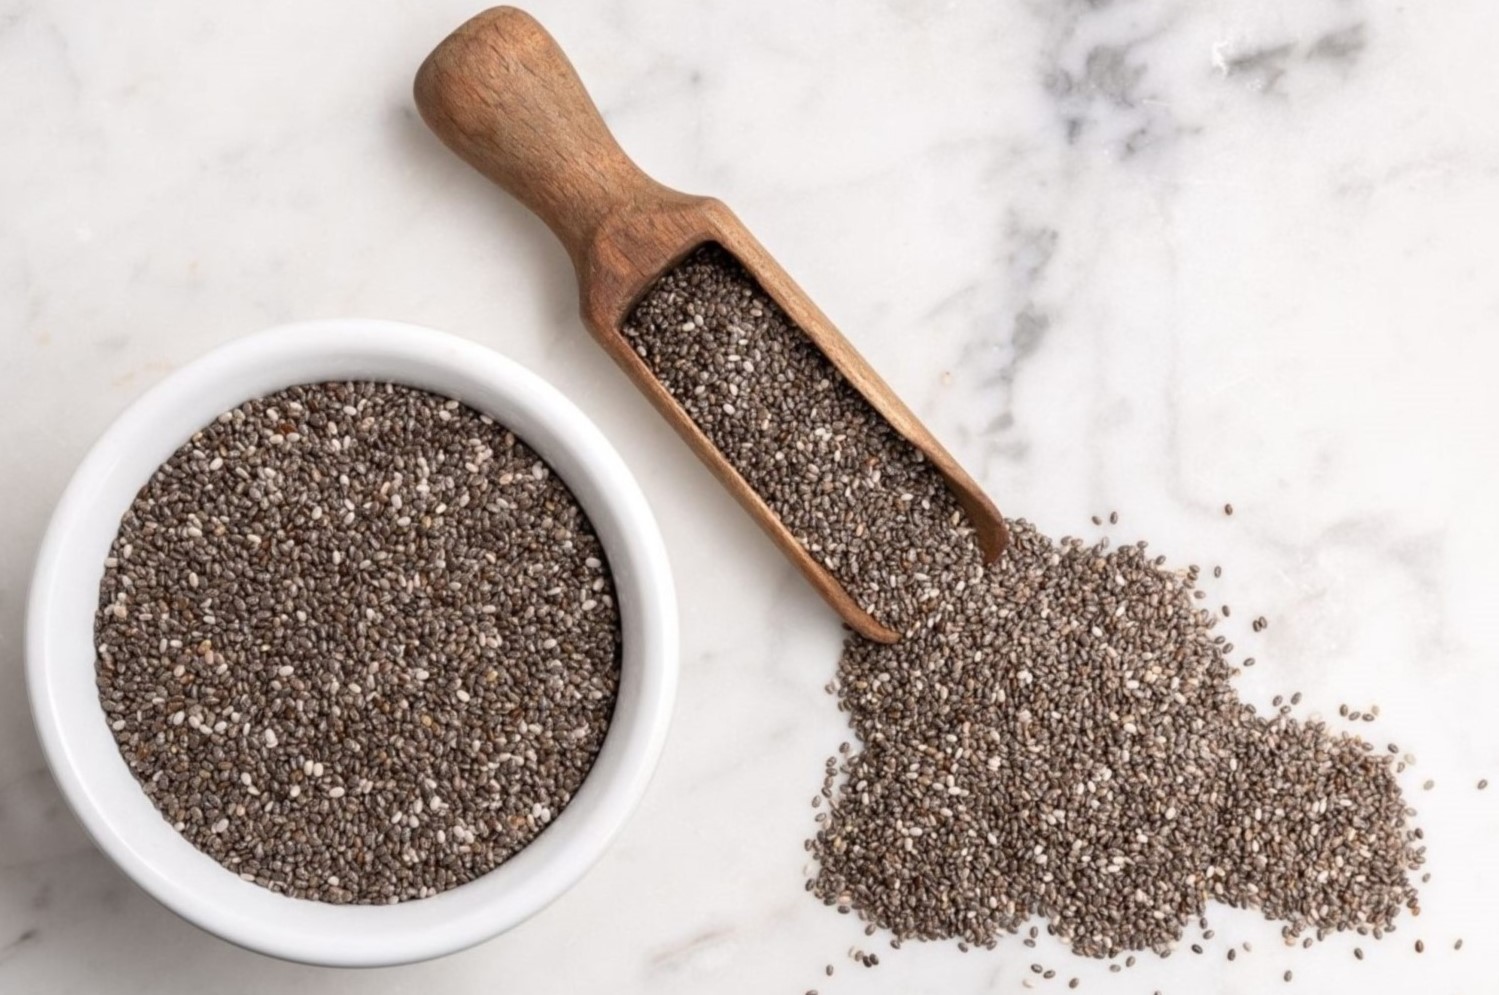 Where Can You Find Chia Seeds In The Grocery Store